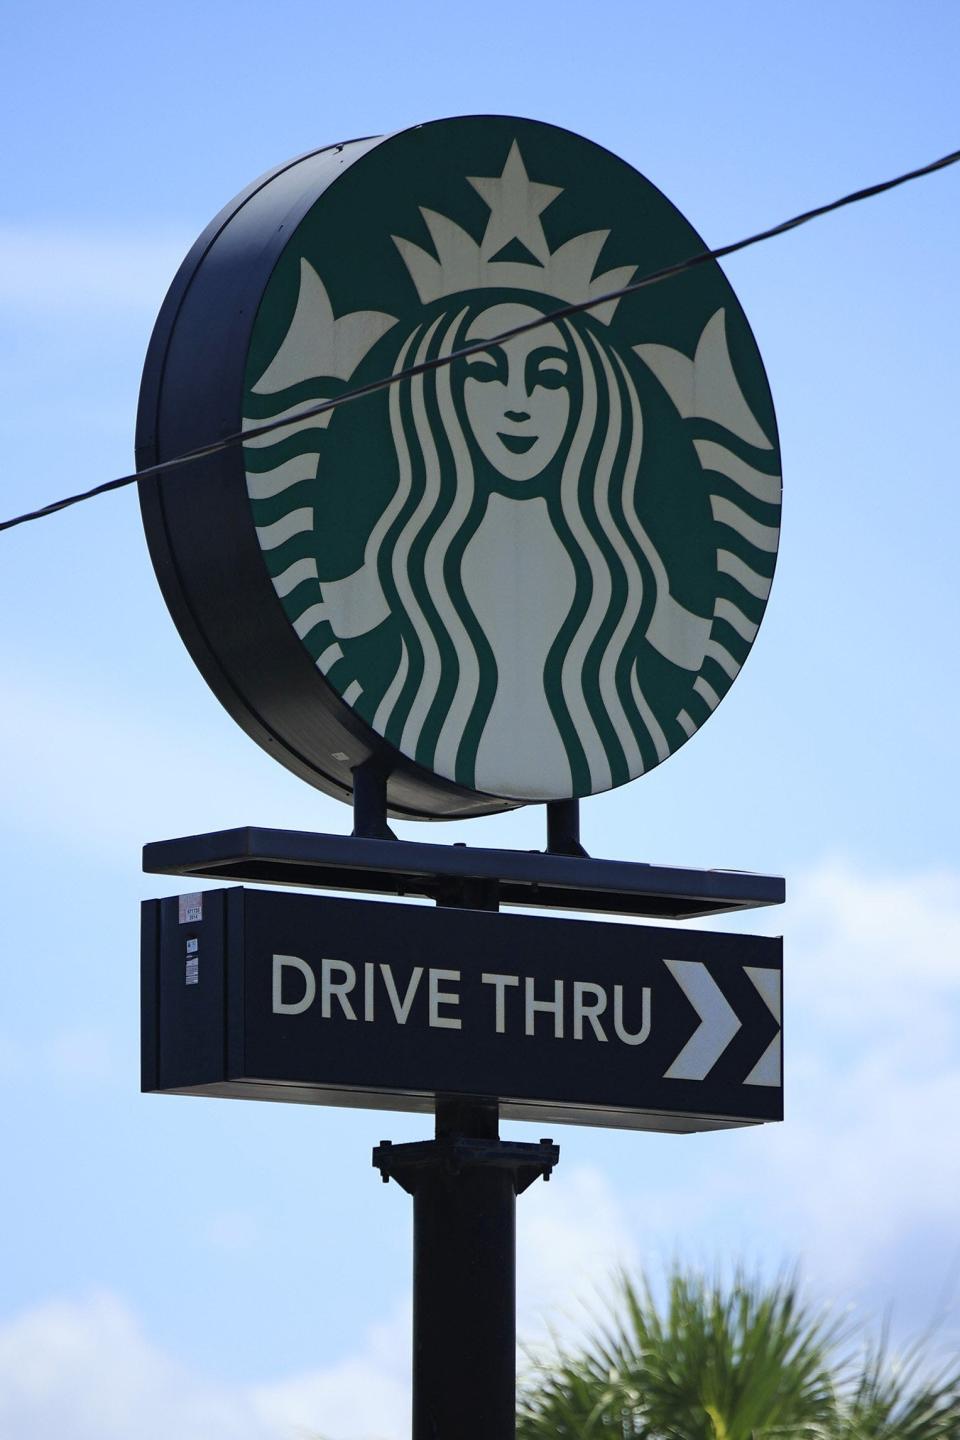 The sign at Starbucks Coffee